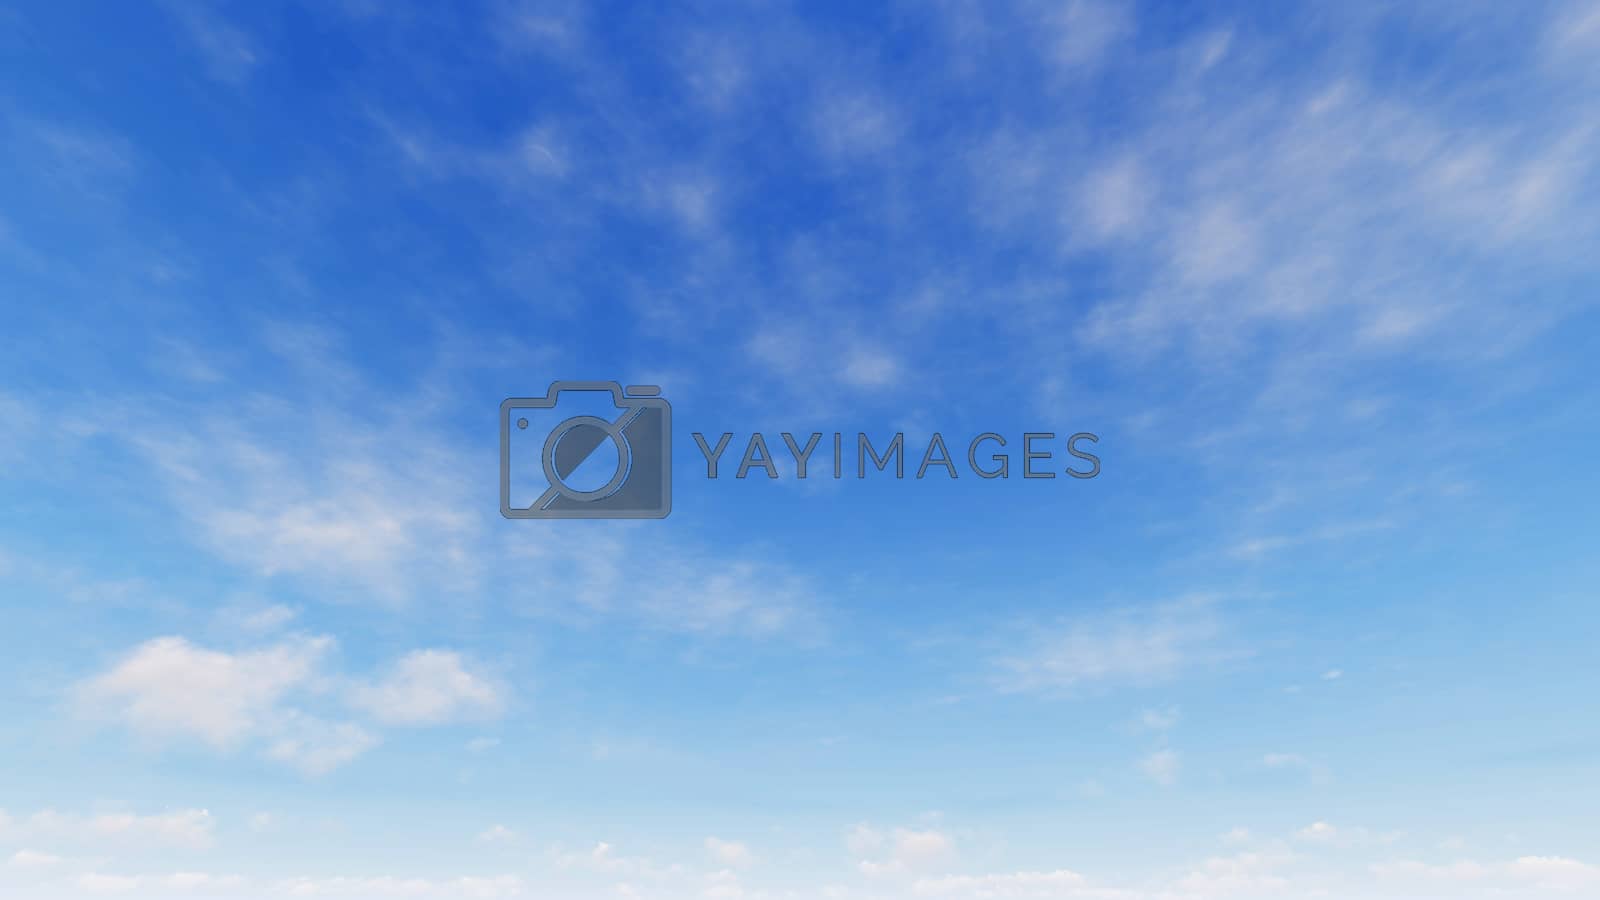 Royalty free image of Cloudy blue sky abstract background, 3d illustration by teerawit